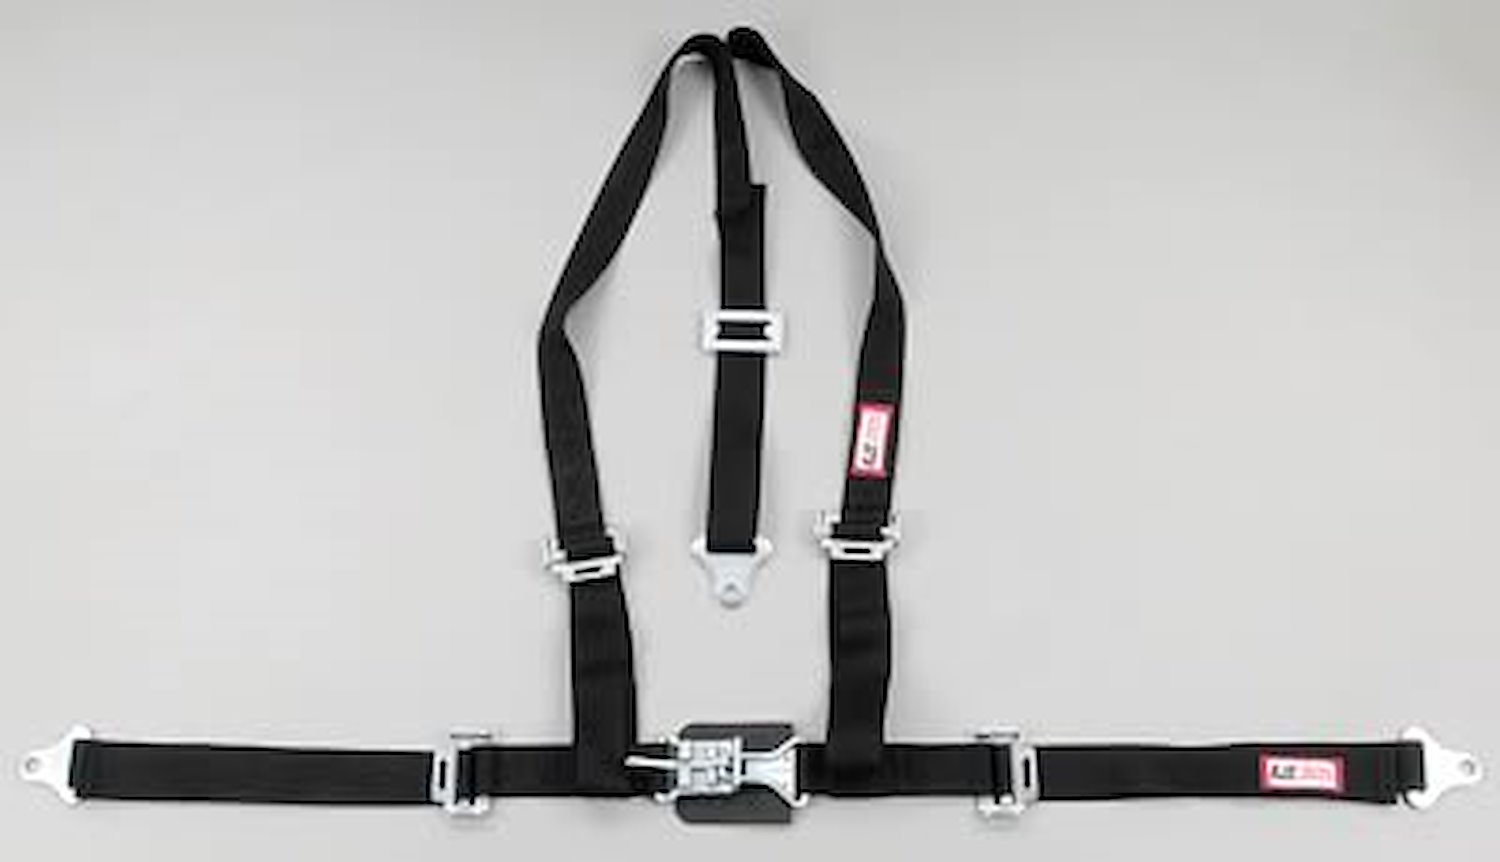 NON-SFI L&L HARNESS 2 PULL UP Lap Belt SNAP SEWN IN 2 S.H. Individual ROLL BAR Mount w/STERNUM STRAP WRAP/SNAP ORANGE